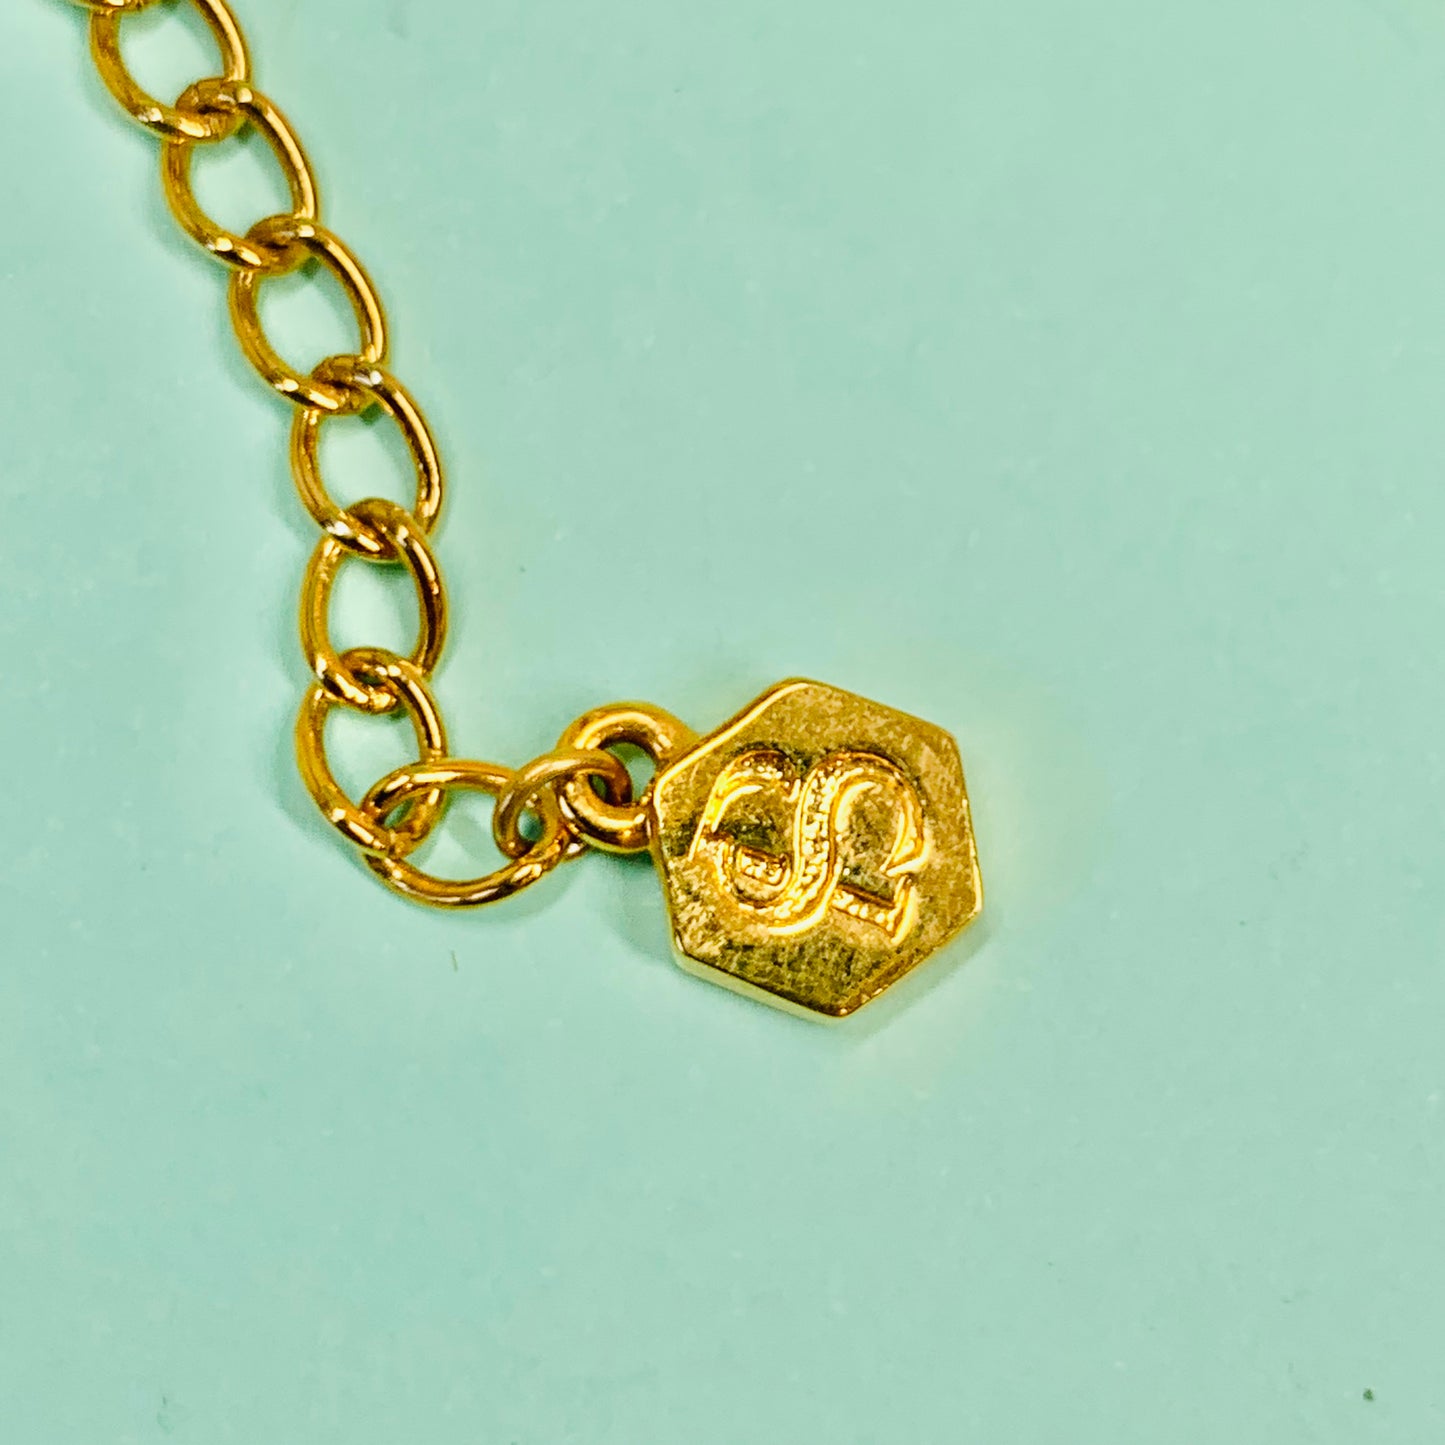 Rare 1980s American Shube triple plated gold beehive hexagon pendant necklace